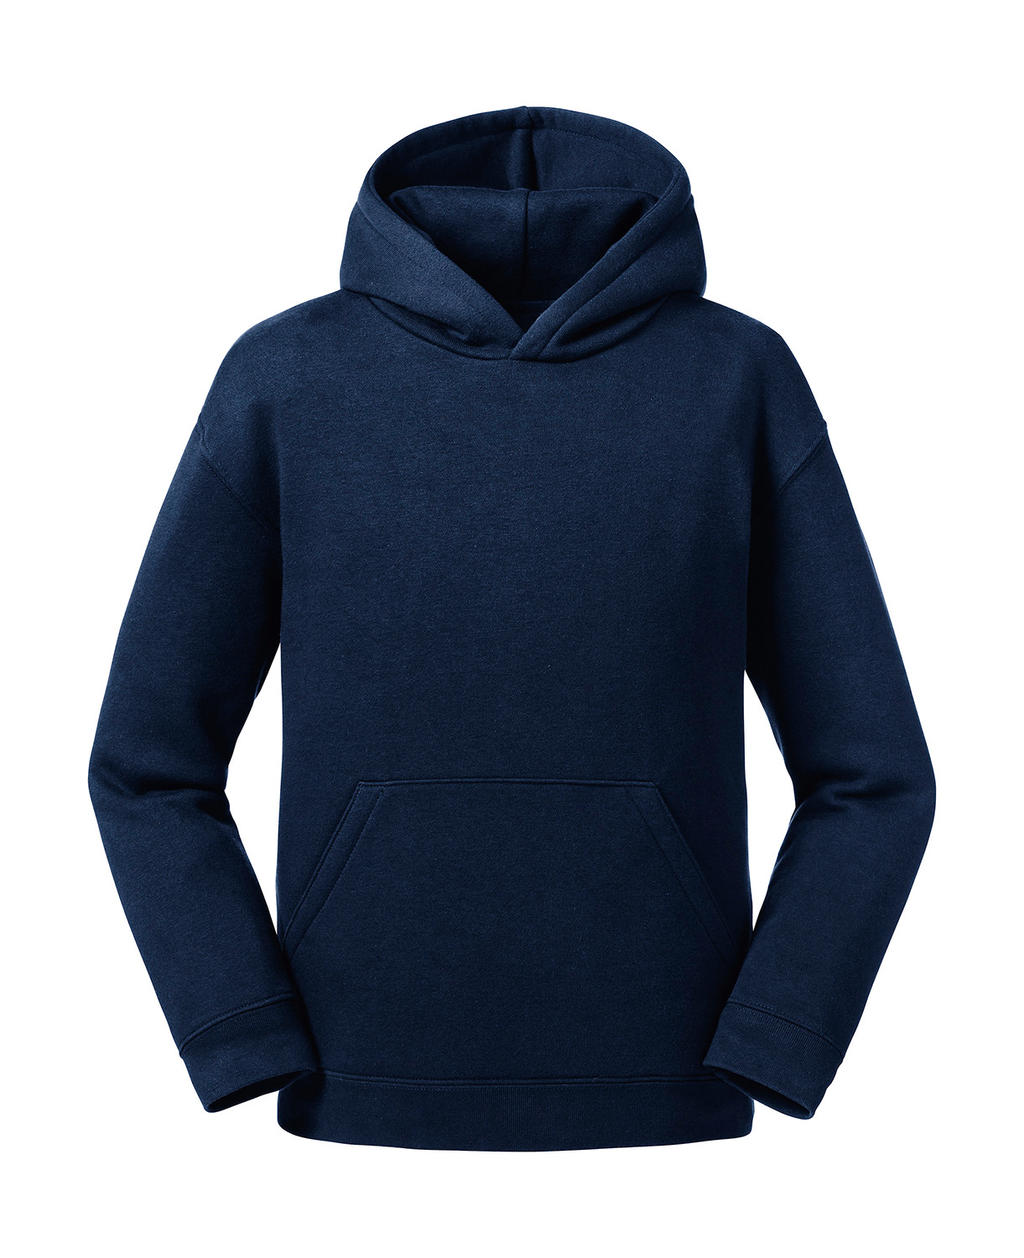  Kids Authentic Hooded Sweat in Farbe French Navy